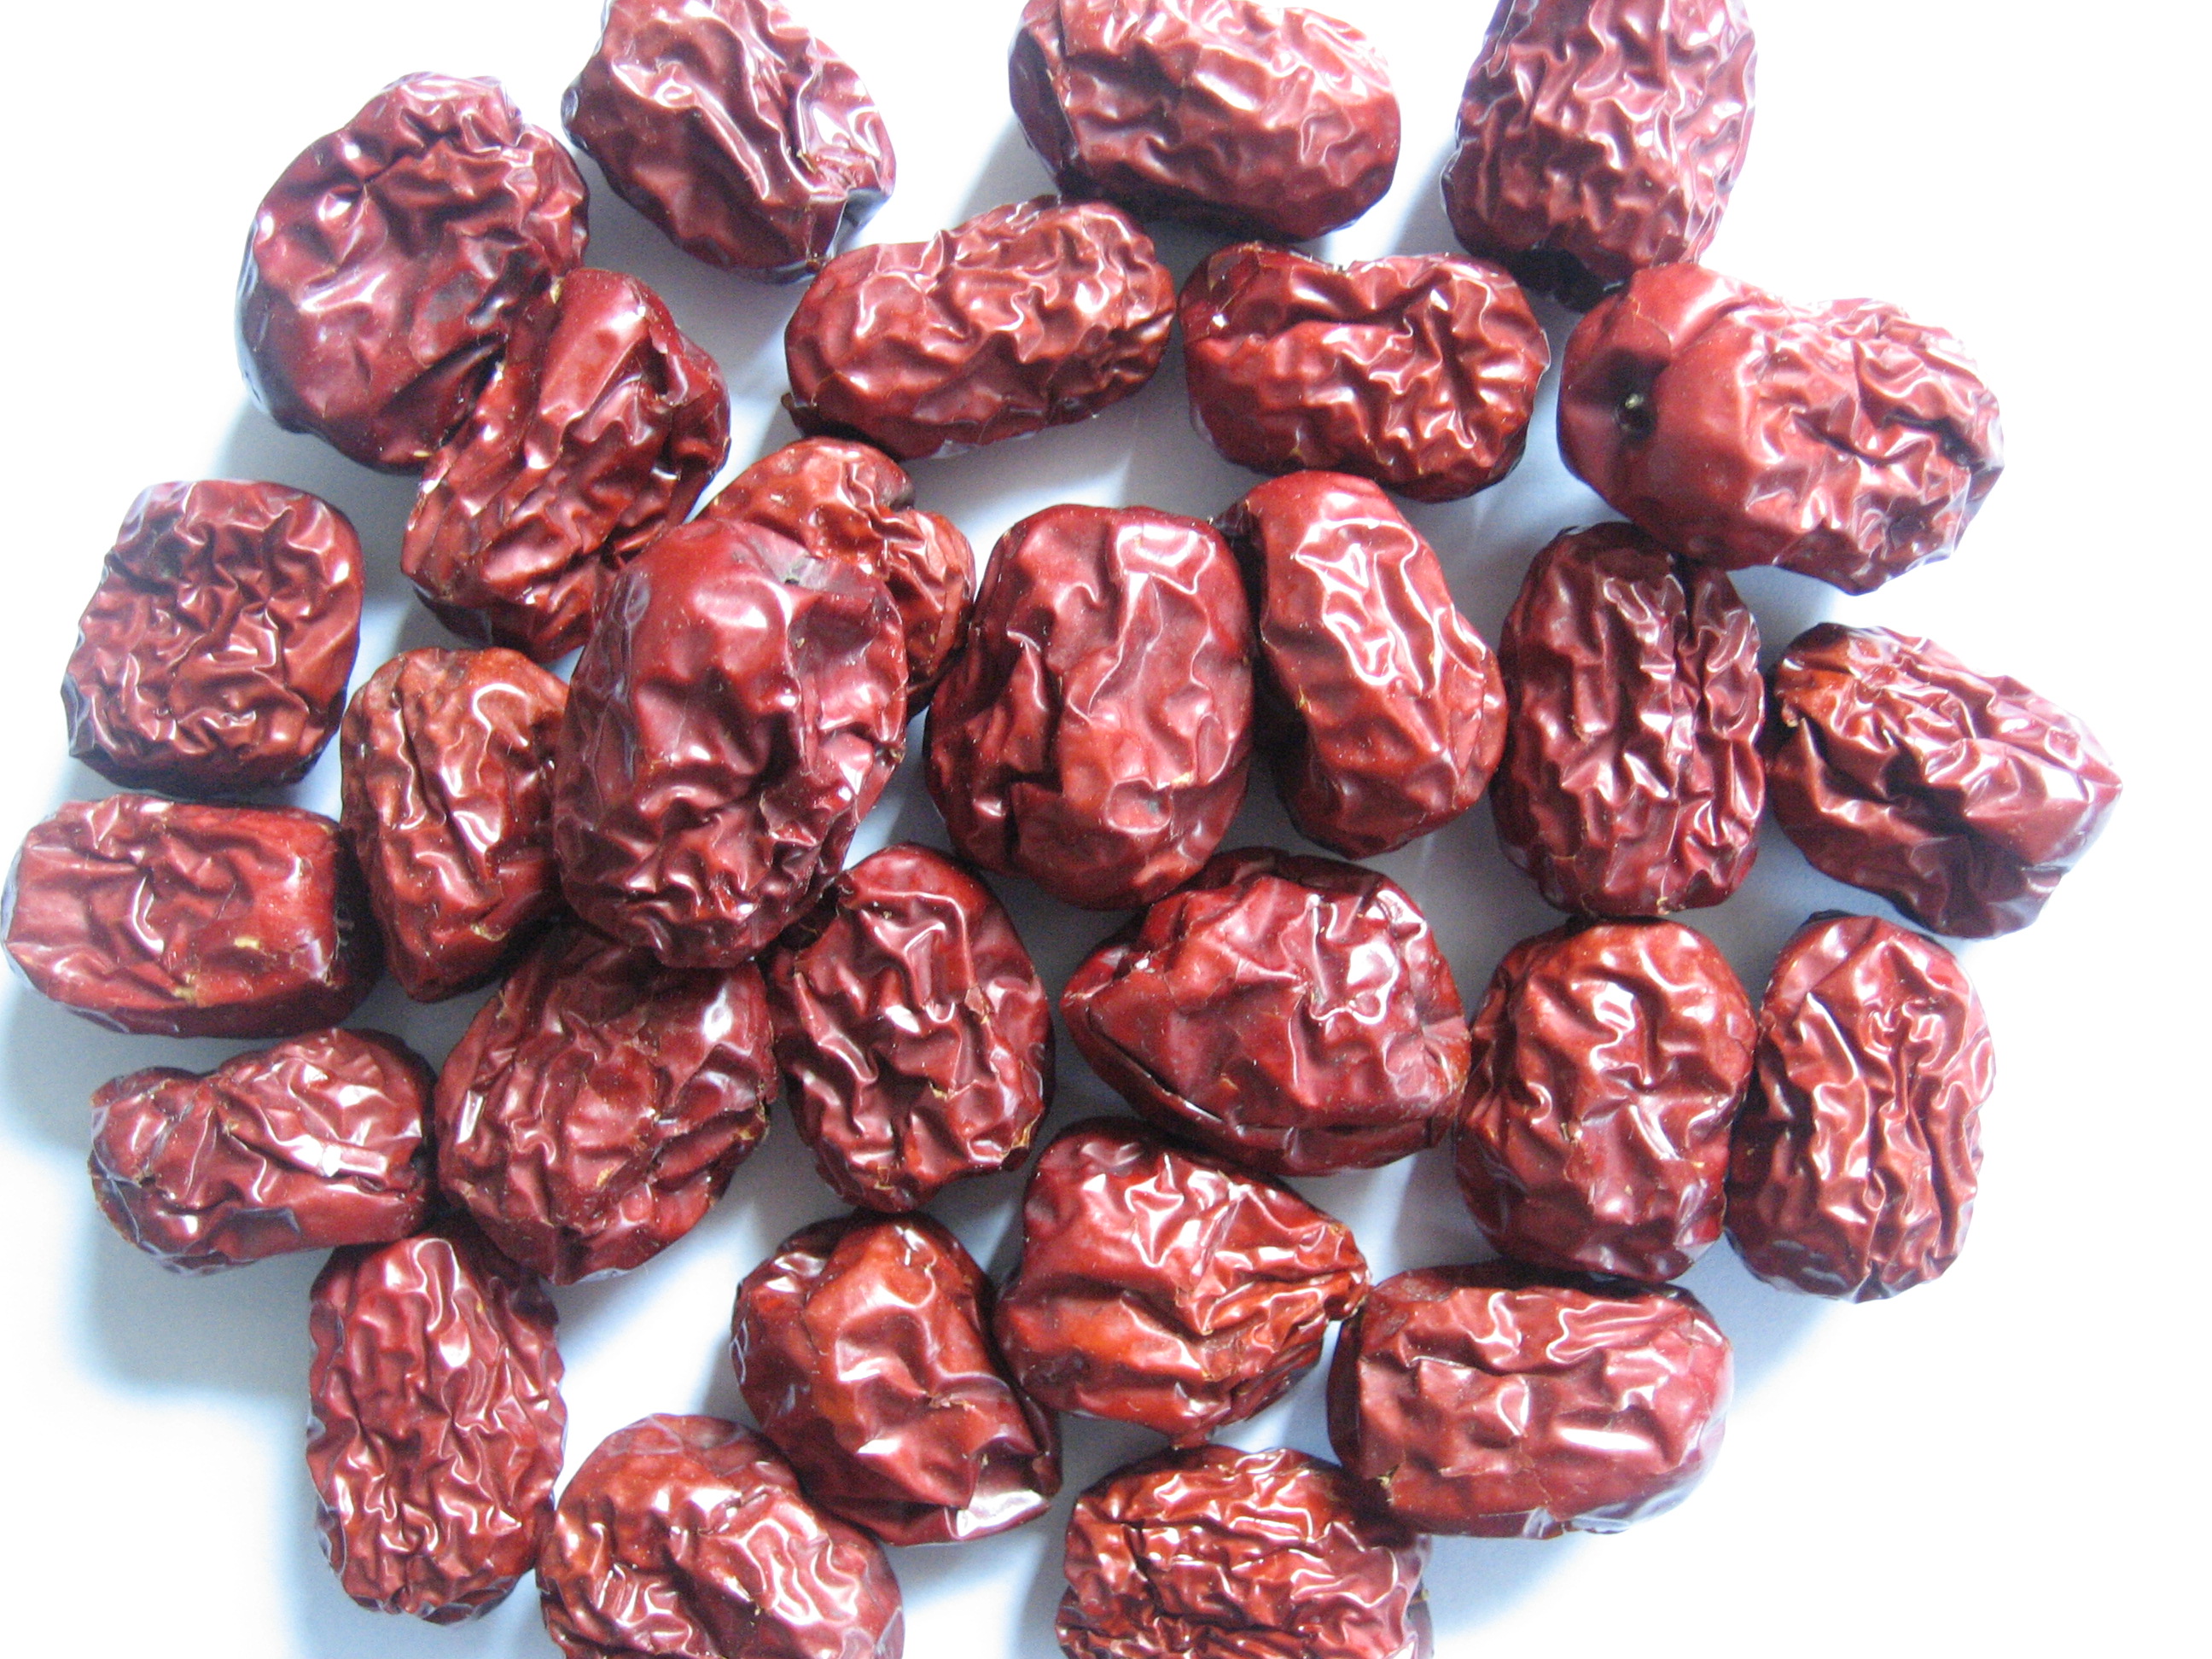 Chinese 100% natural dried date for feed